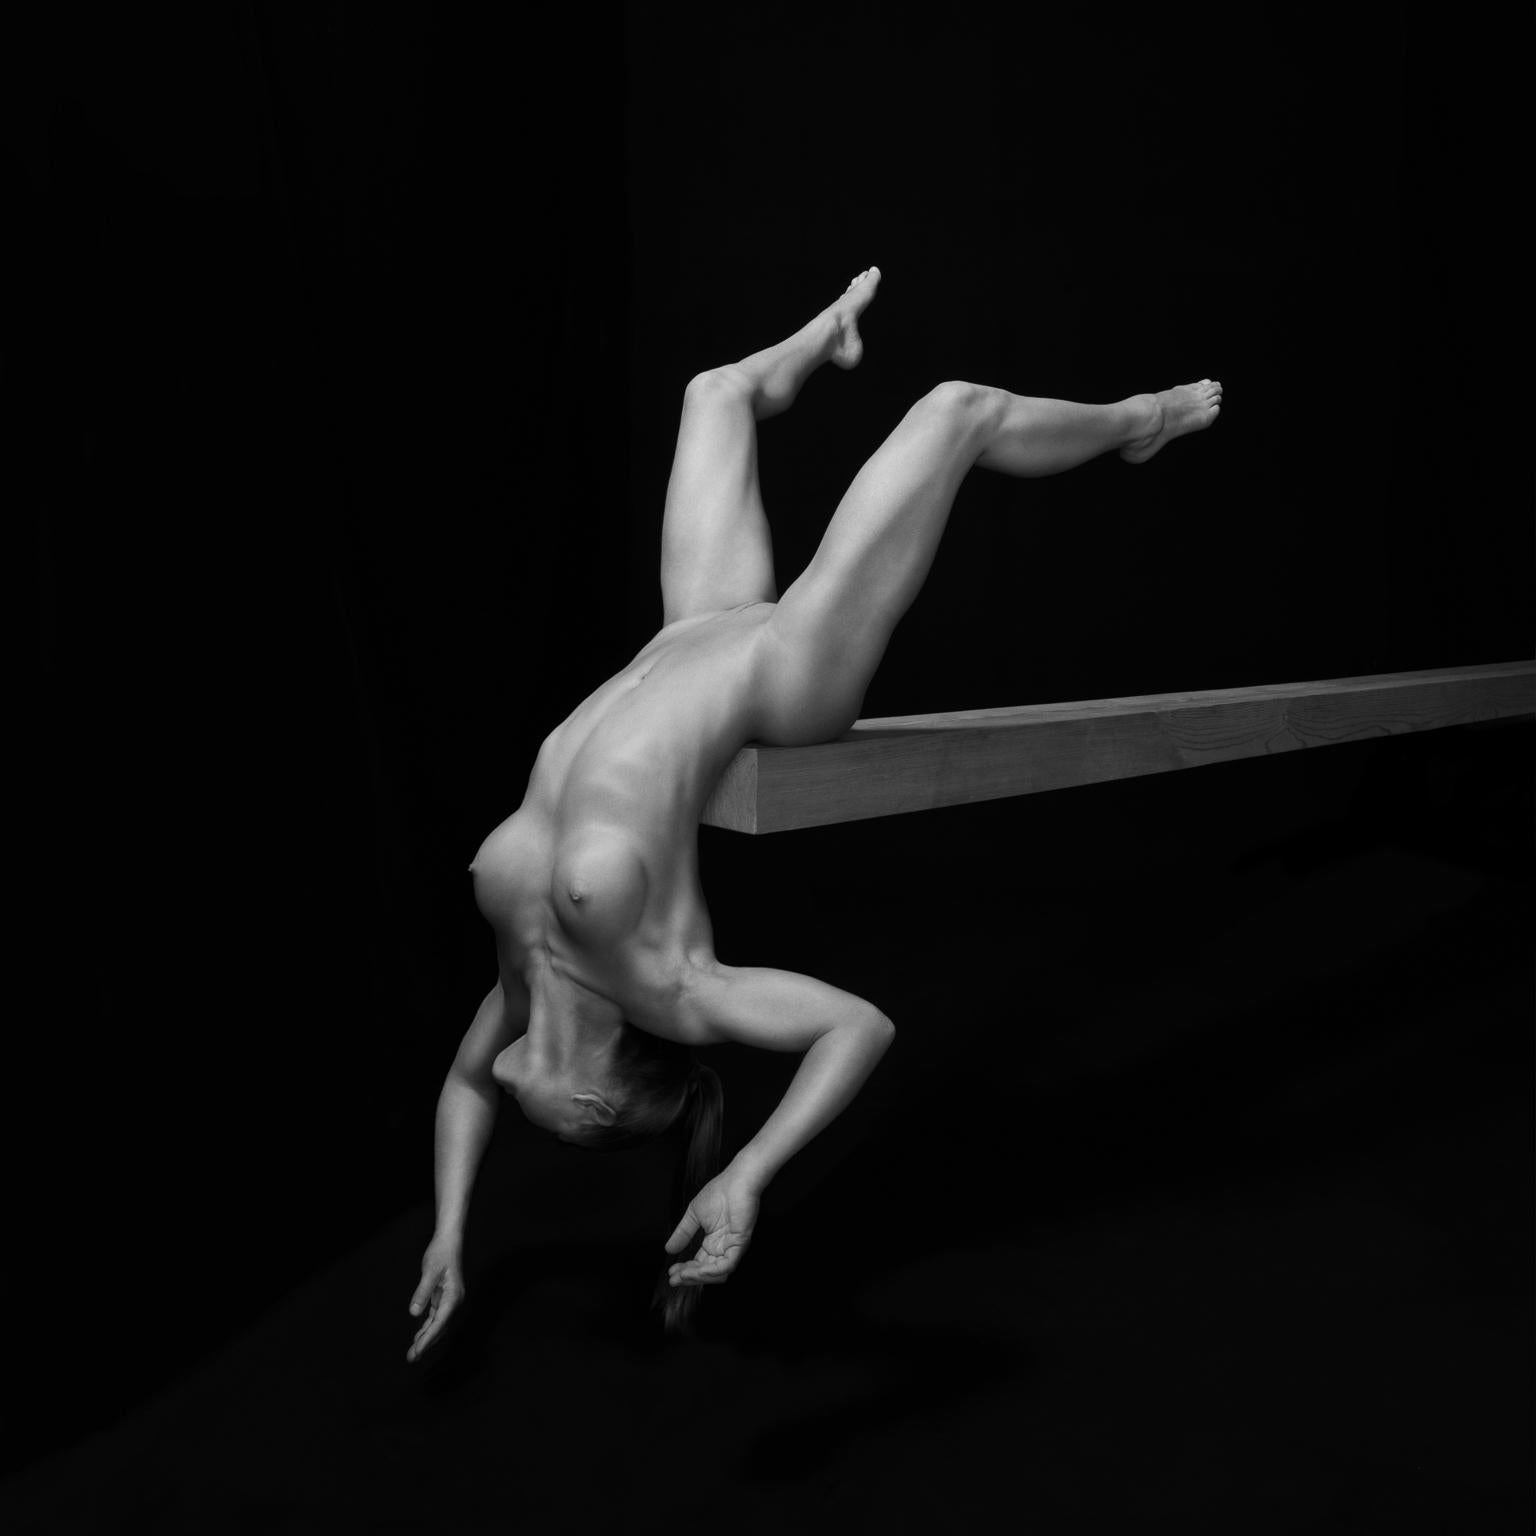 Klaus Kampert Black and White Photograph - Bodies Relating to Space 166.05.12